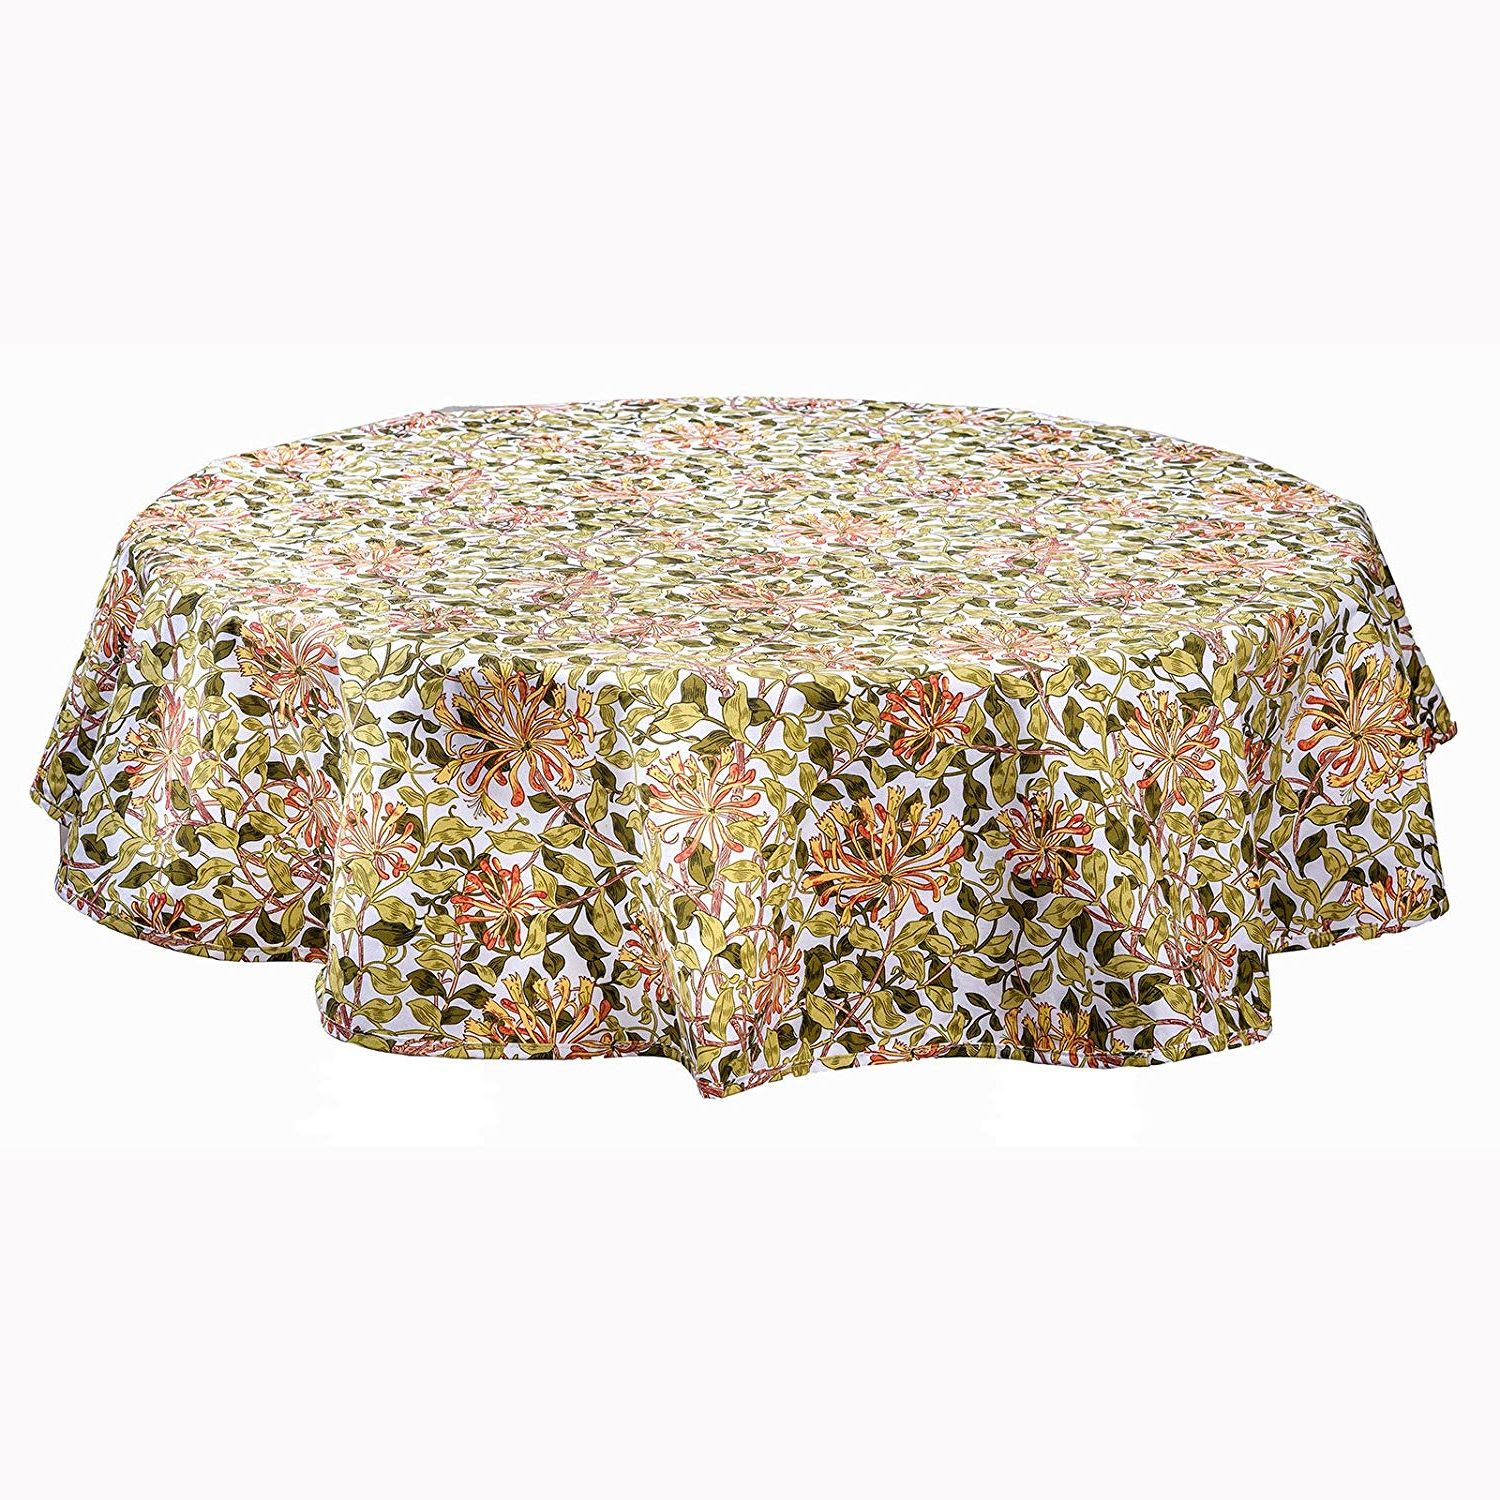 [%william Morris Gallery Honeysuckle 100% Cotton Tablecloth With Recent Morris Round Dining Tables|morris Round Dining Tables Within Well Known William Morris Gallery Honeysuckle 100% Cotton Tablecloth|latest Morris Round Dining Tables Inside William Morris Gallery Honeysuckle 100% Cotton Tablecloth|popular William Morris Gallery Honeysuckle 100% Cotton Tablecloth Regarding Morris Round Dining Tables%] (View 13 of 25)